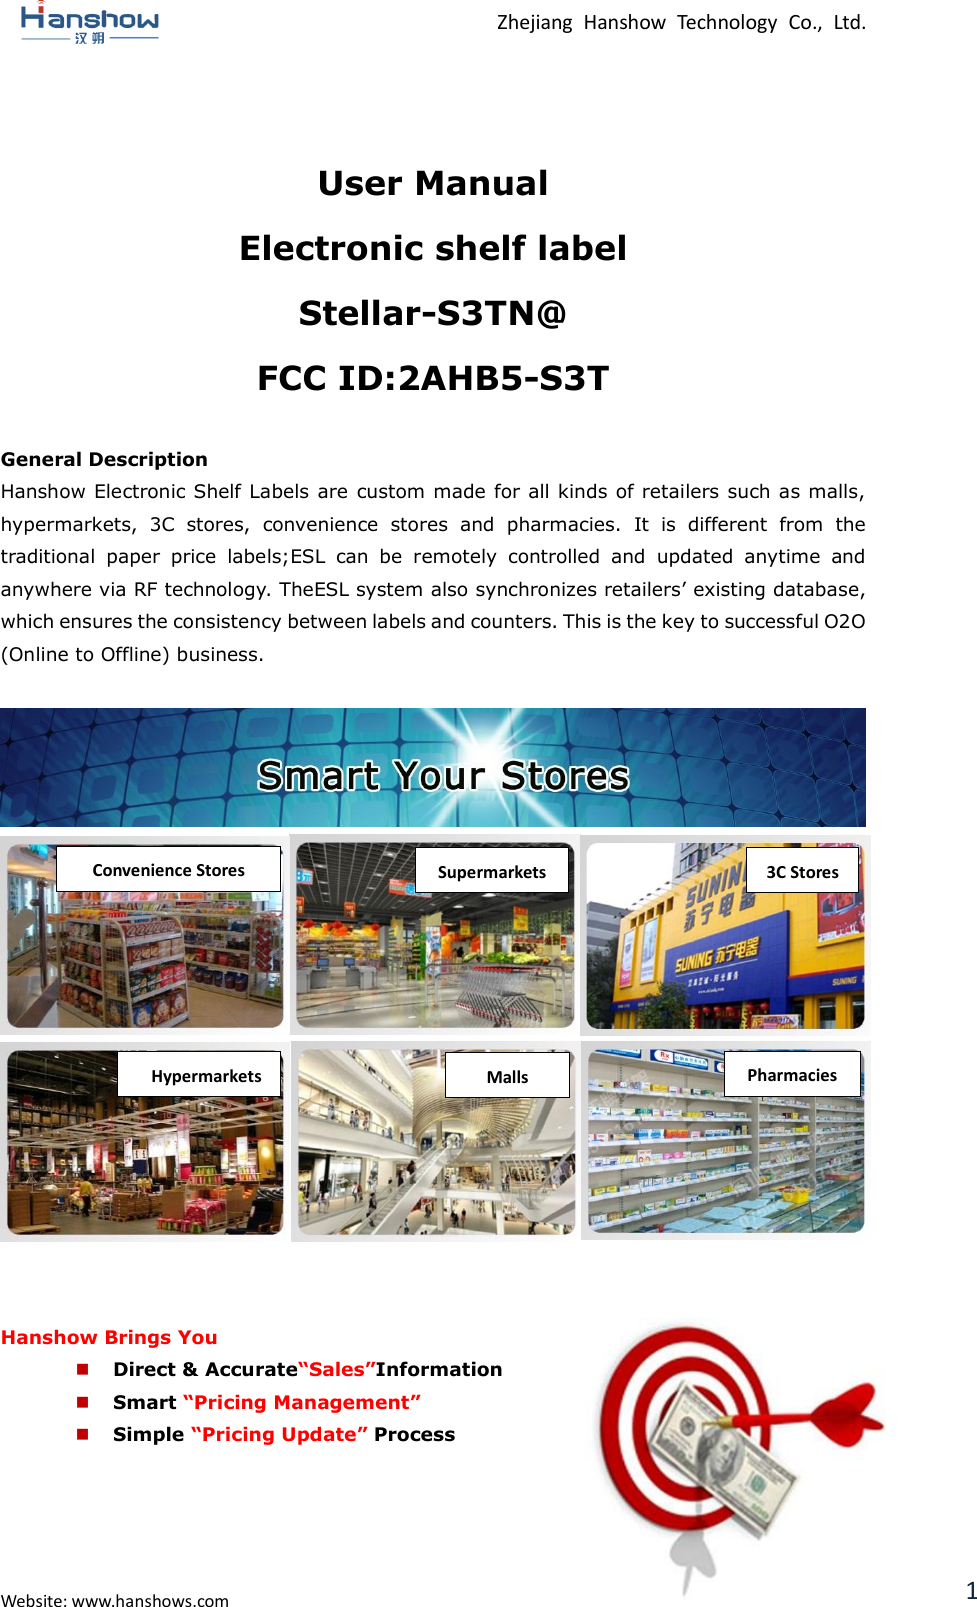  Zhejiang  Hanshow  Technology  Co.,  Ltd.   Website: www.hanshows.com 1  User Manual Electronic shelf label Stellar-S3TN@ FCC ID:2AHB5-S3T  General Description Hanshow Electronic Shelf Labels  are custom made for all kinds of retailers such as malls, hypermarkets,  3C  stores,  convenience  stores  and  pharmacies.  It  is  different  from  the traditional  paper  price  labels;ESL  can  be  remotely  controlled  and  updated  anytime  and anywhere via RF technology. TheESL system also synchronizes retailers’ existing database, which ensures the consistency between labels and counters. This is the key to successful O2O (Online to Offline) business.                    Hanshow Brings You  Direct &amp; Accurate“Sales”Information  Smart “Pricing Management”  Simple “Pricing Update” Process    Convenience Stores Supermarkets 3C Stores Pharmacies Malls Hypermarkets G-MALL 